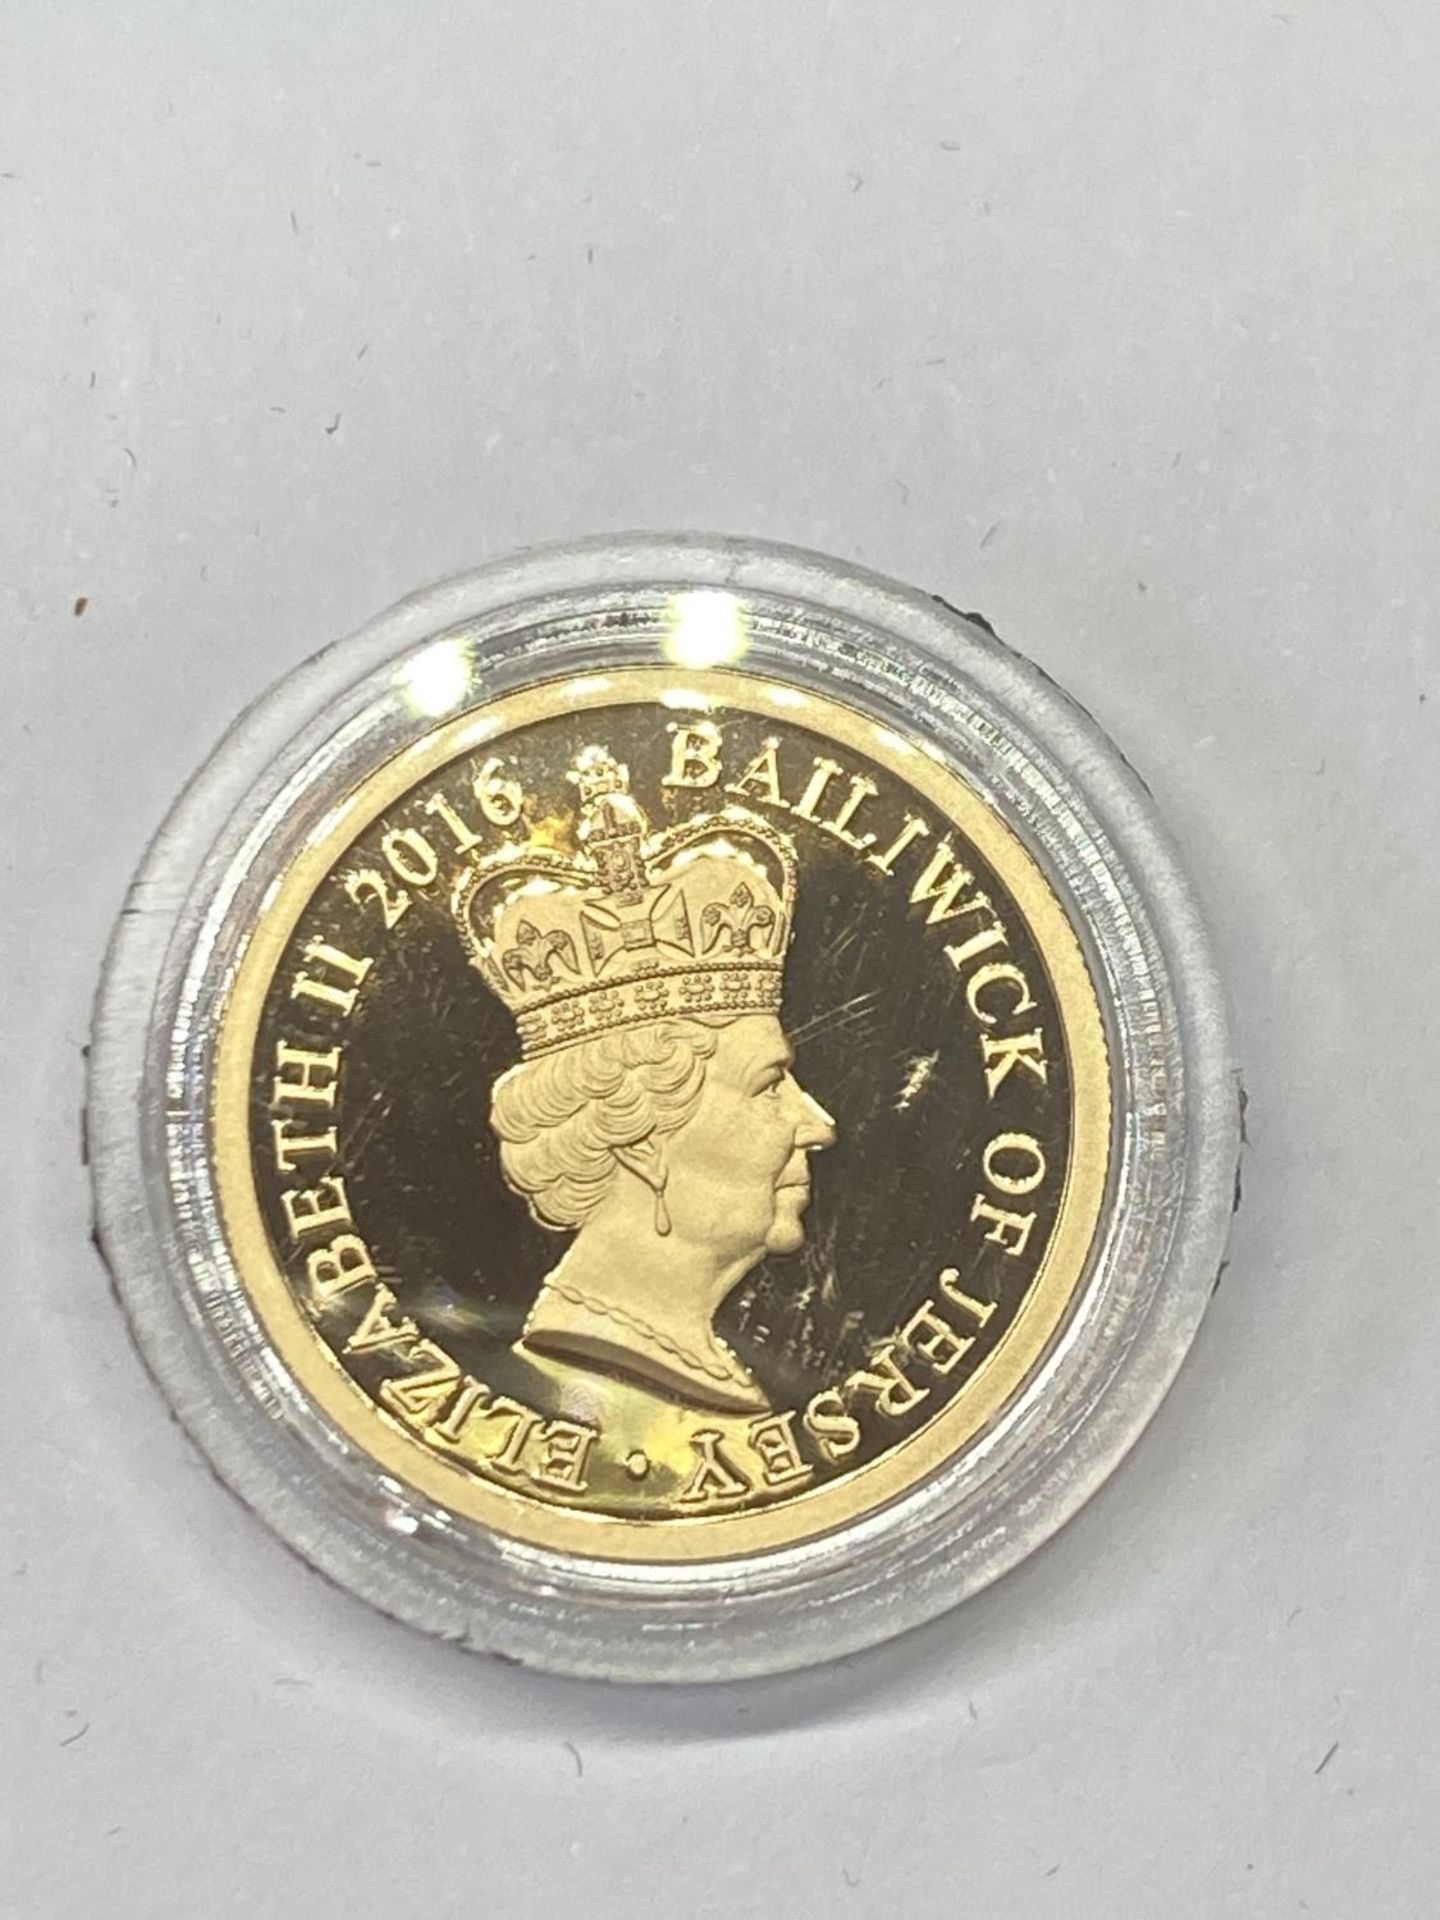 A 2016 QE2 90TH BIRTHDAY JERSEY £1 GOLD PROOF COIN LIMITED EDITION NUMBER 773 OF 995 GROSS WEIGHT - Image 3 of 4